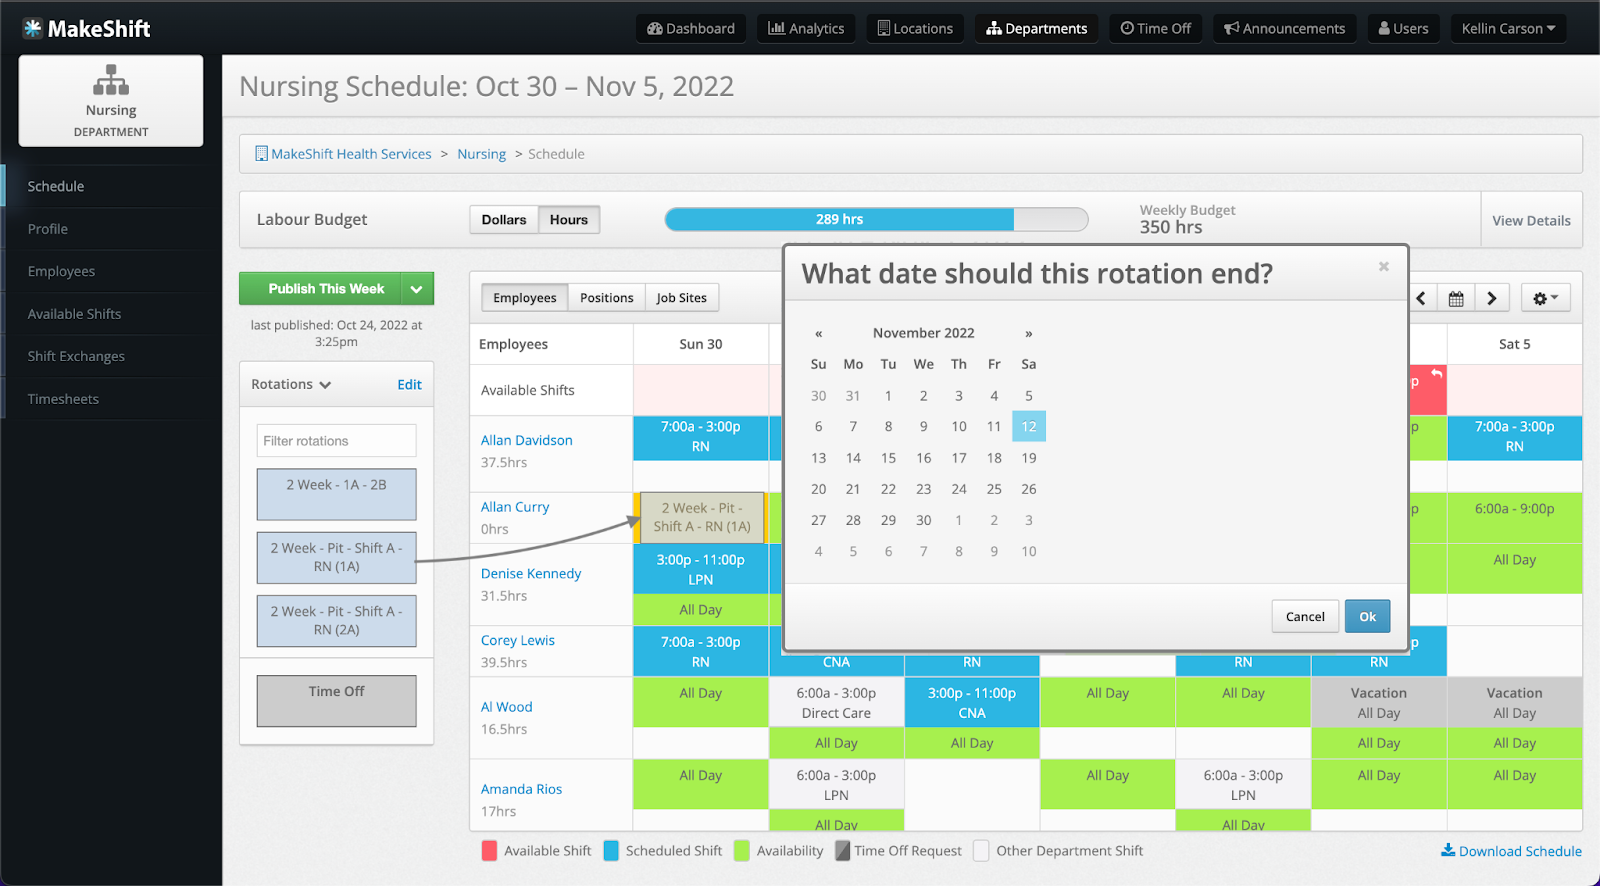 Rotation-Based Scheduling